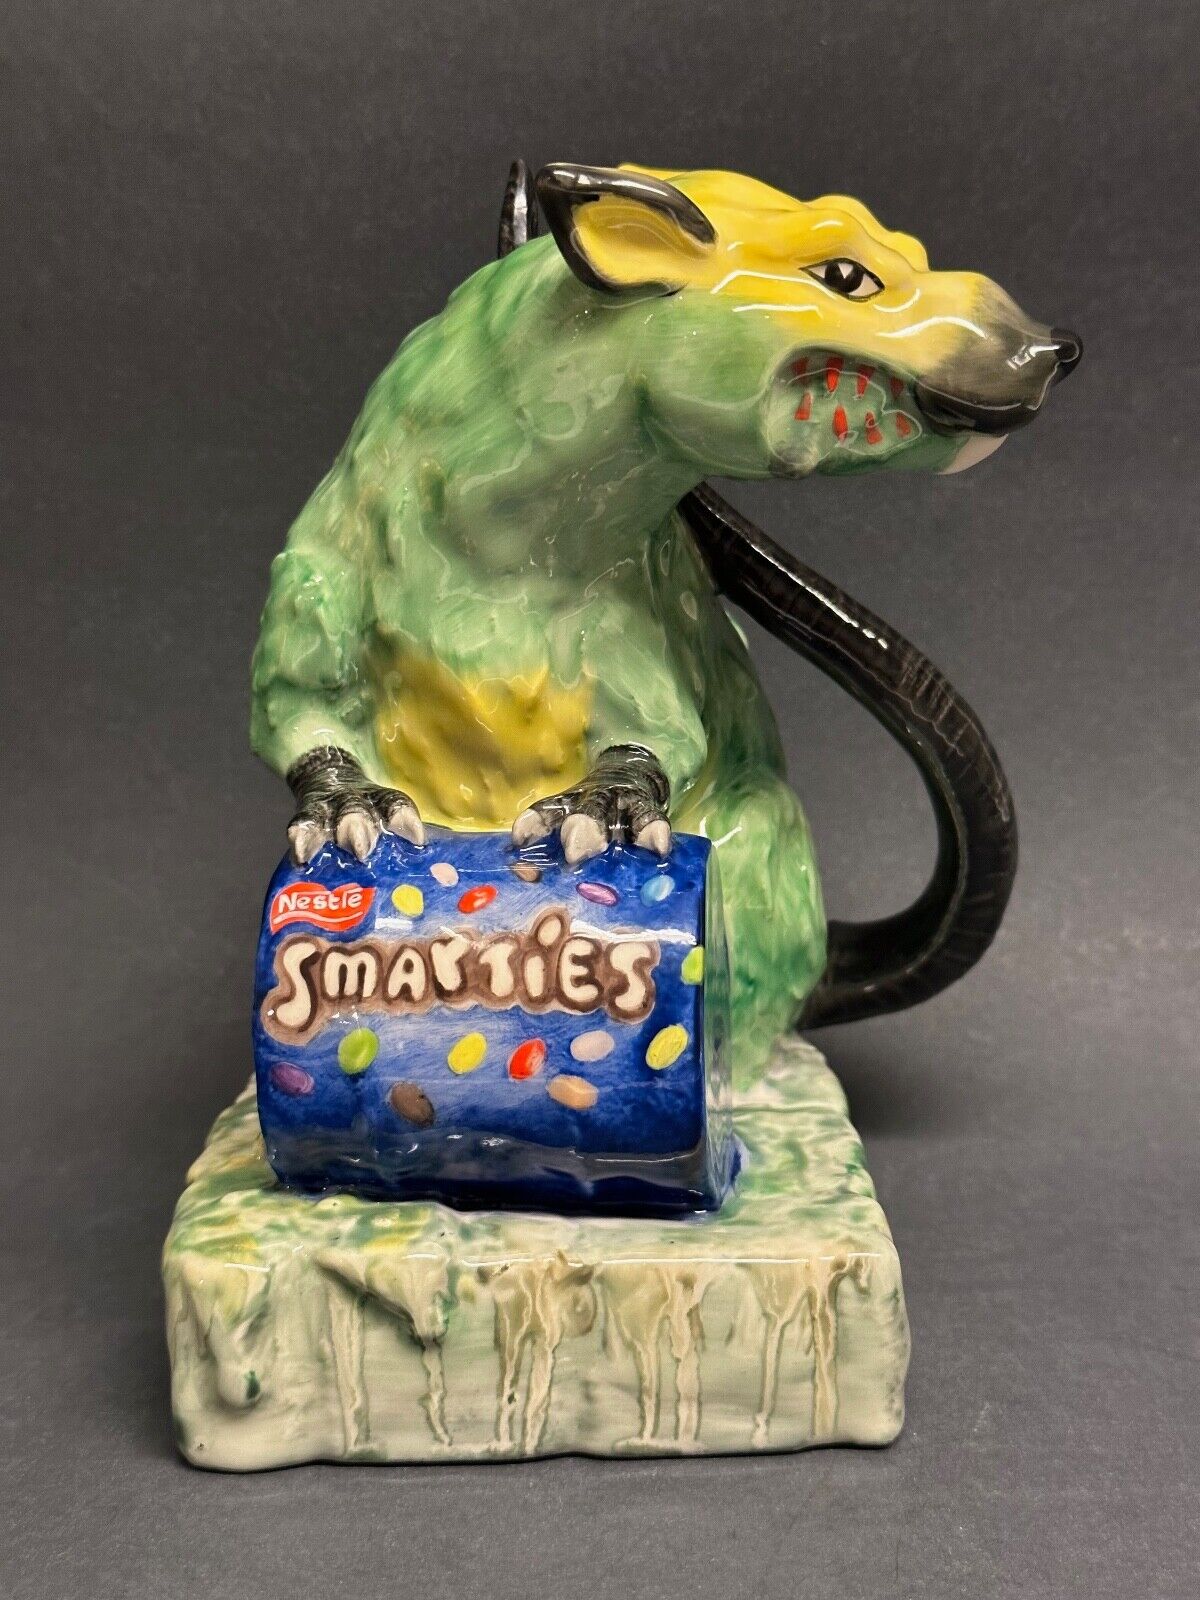 Kevin Francis 'Smarties' Chocolate Toxic Rat 1/1 Artist Edition, 2023